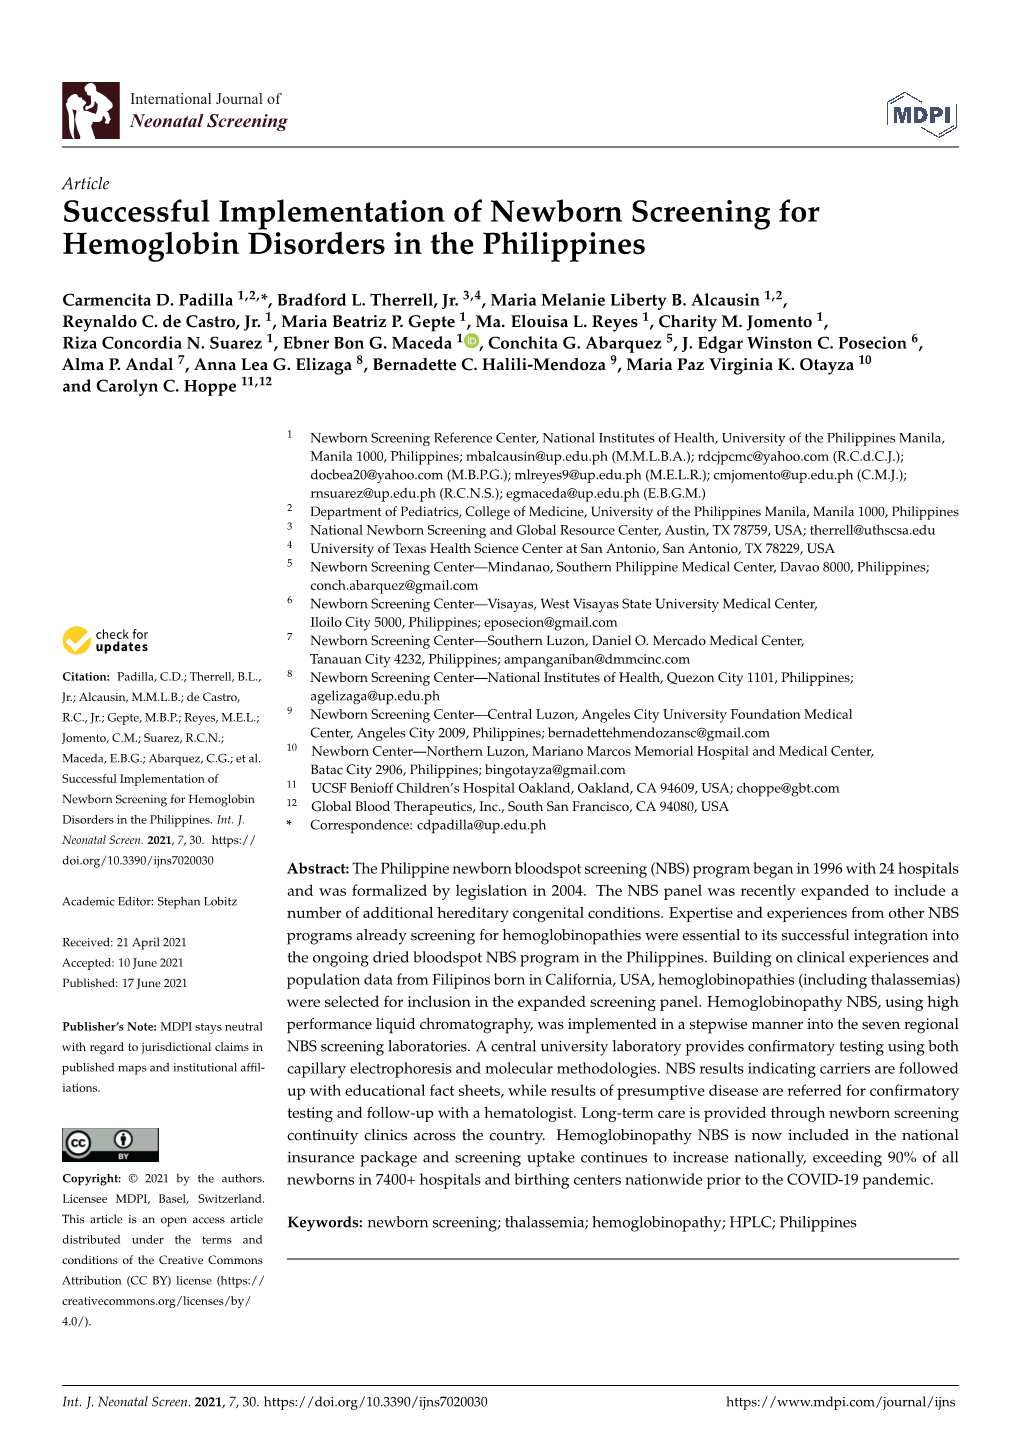 Successful Implementation of Newborn Screening for Hemoglobin Disorders in the Philippines